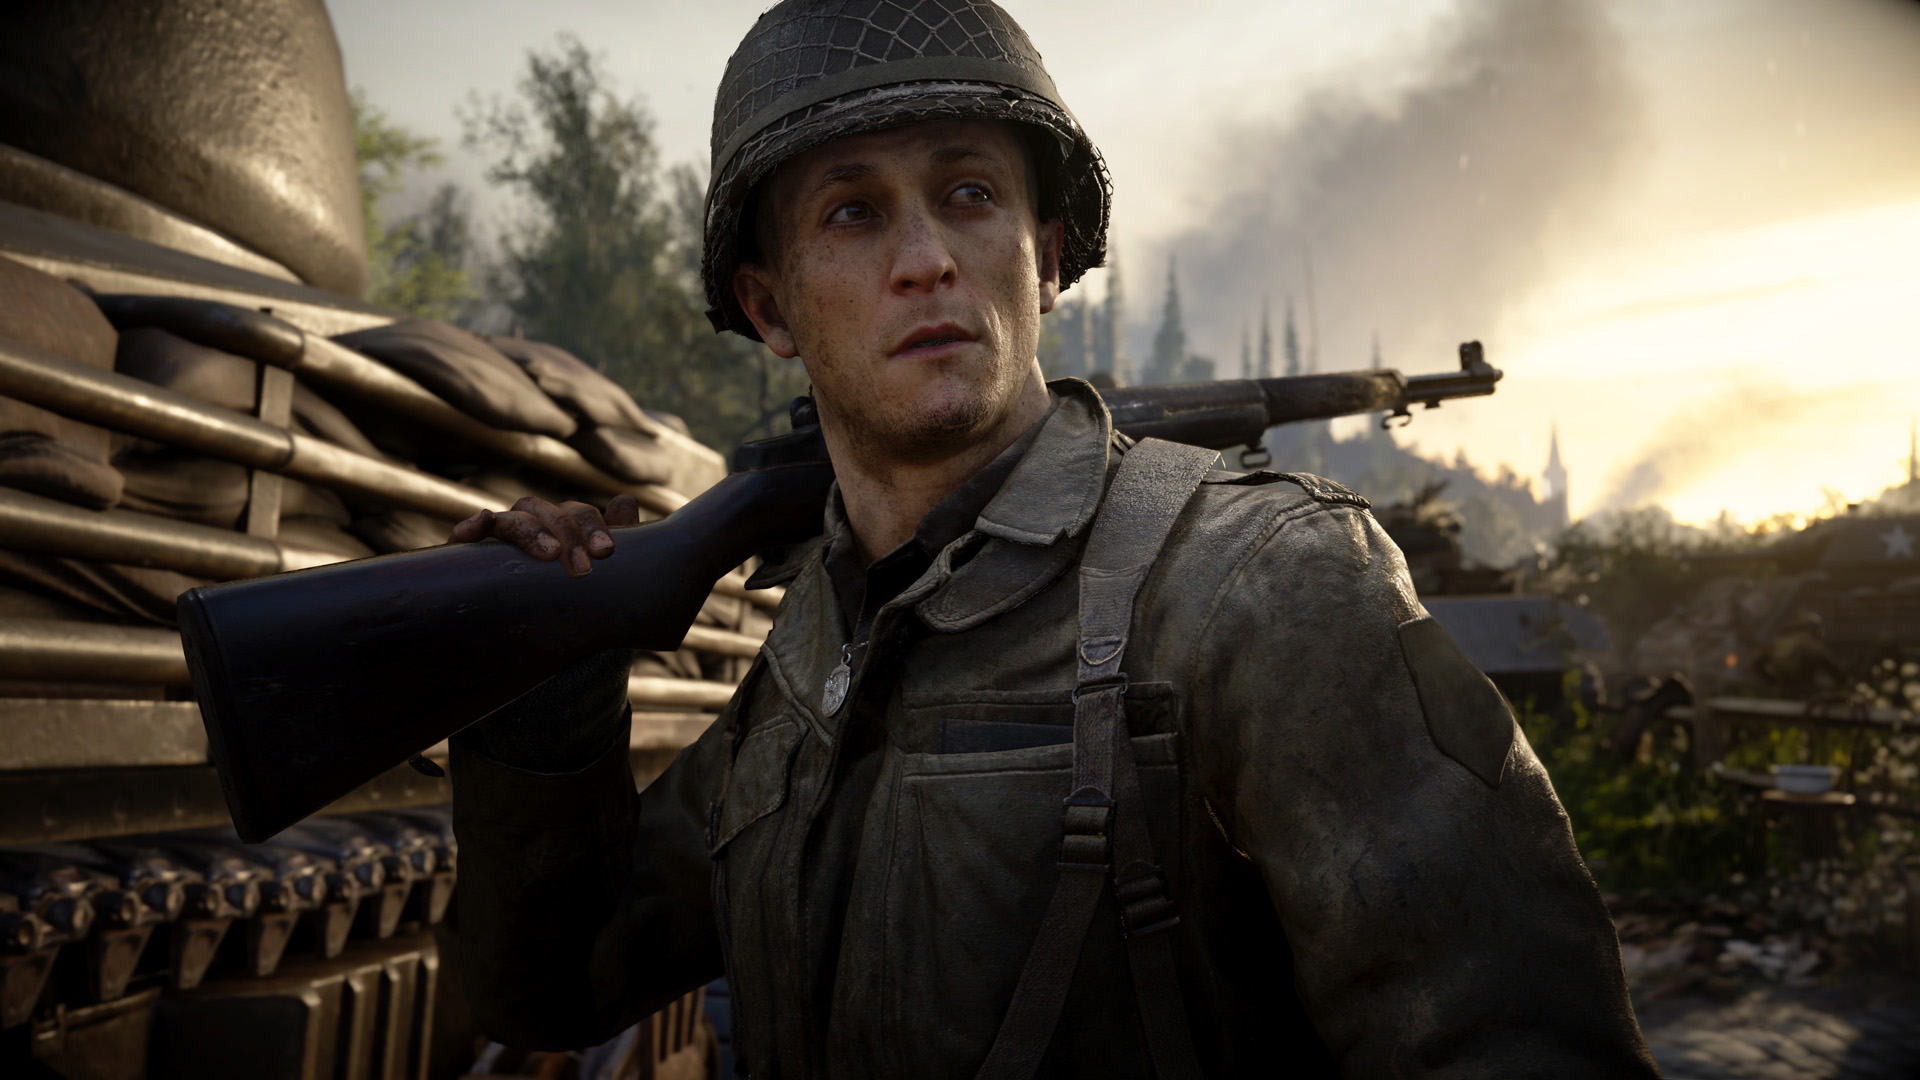 Скриншот *Call of Duty WWII [PS4] 5.05 / 6.72 / 7.02 [EUR] (2017) [Русский] (v1.05)*